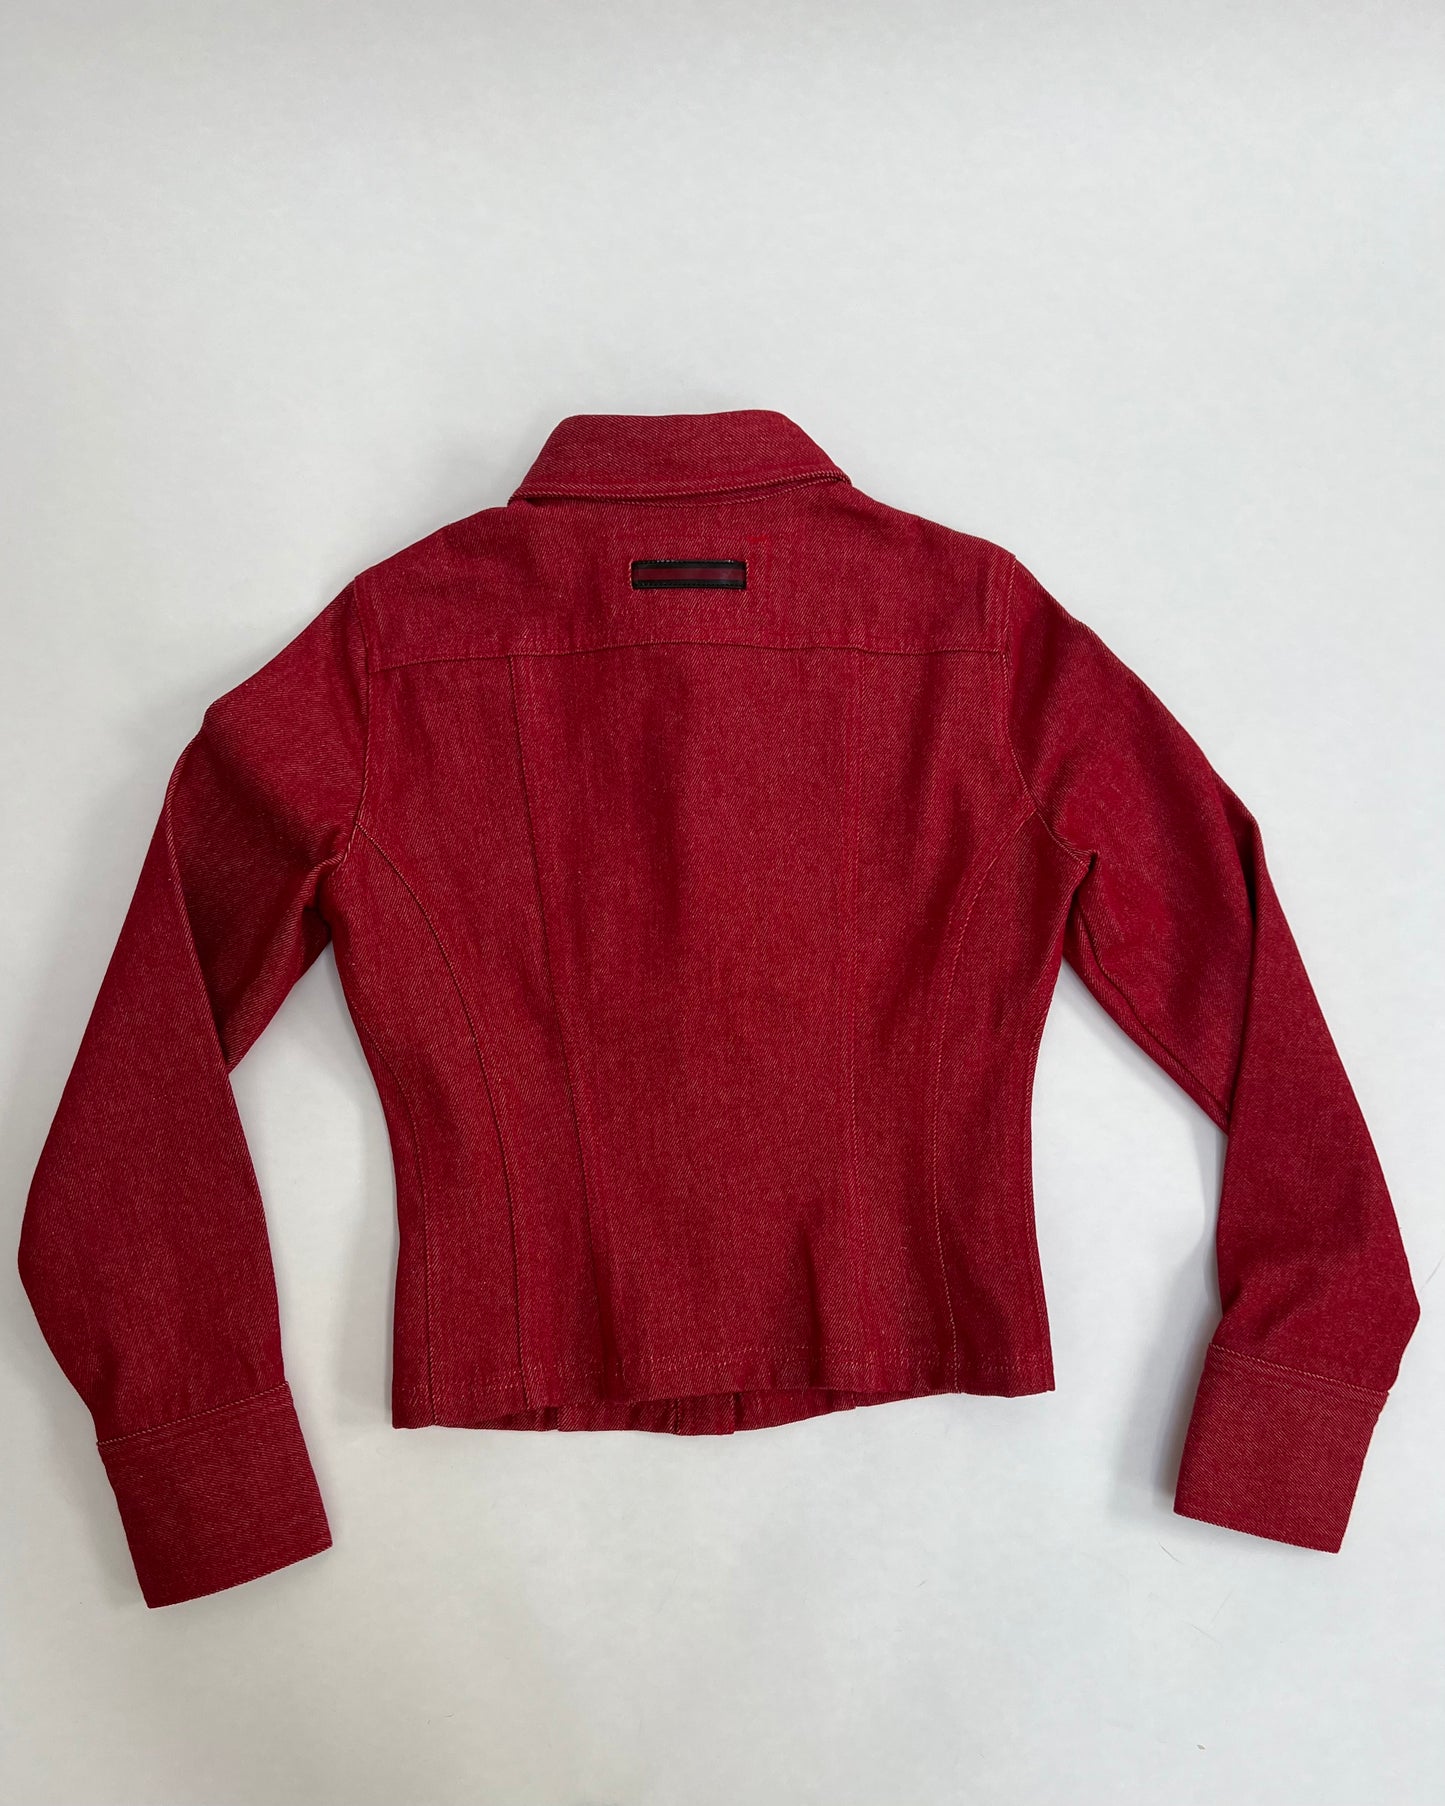 Gucci by Tom Ford 1999 red denim jacket